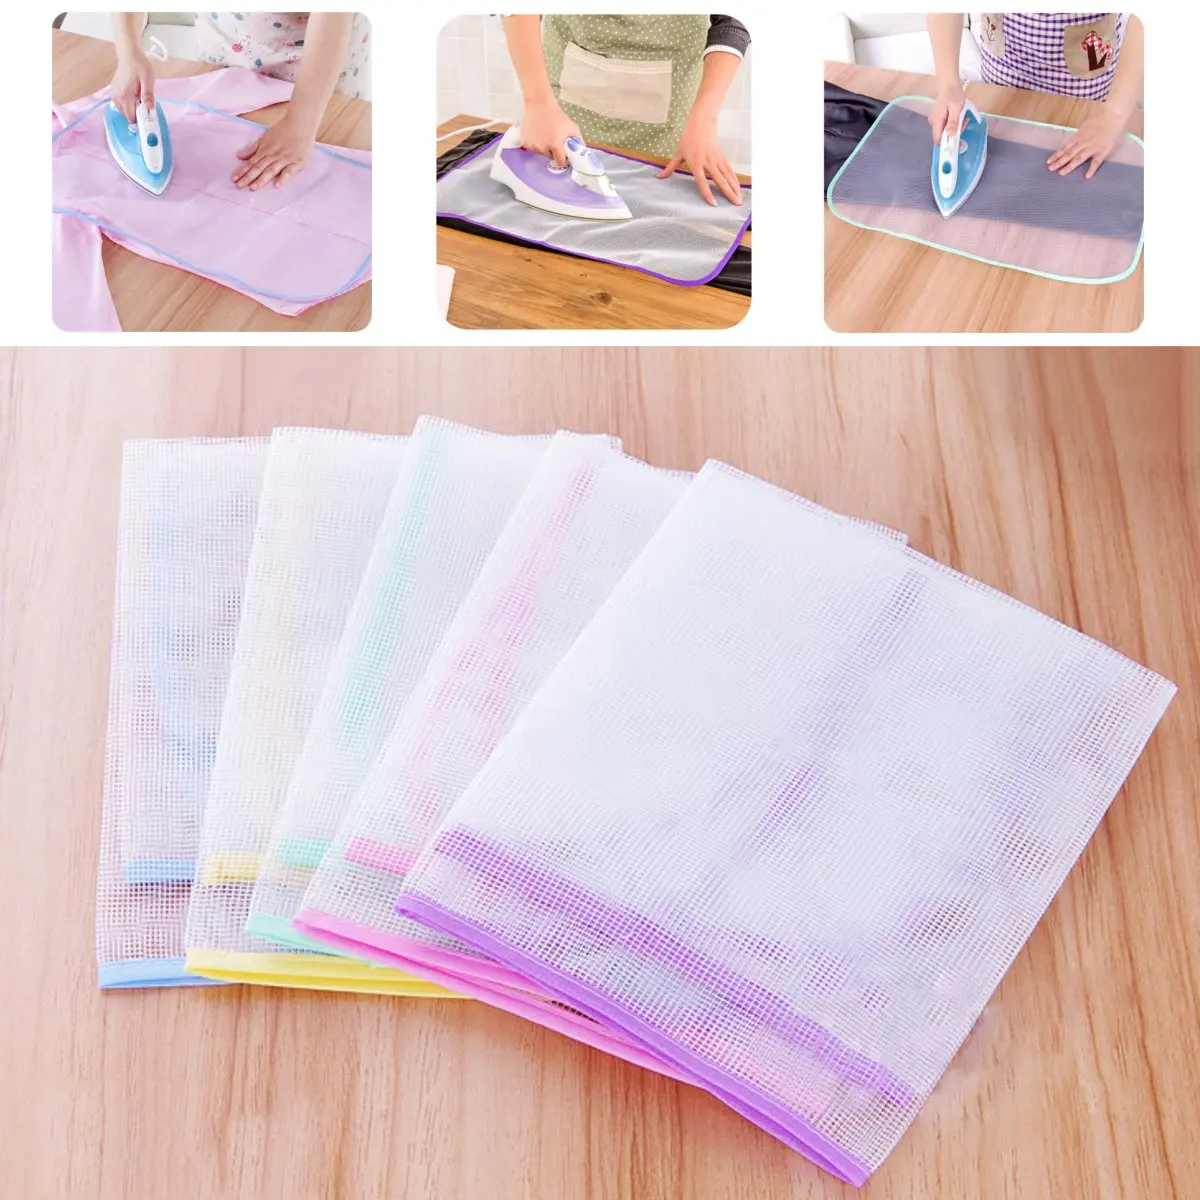 Protective Press Wire Mesh Ironing Delicate Garment Clothes Ironing Board Cover Mesh Cloth